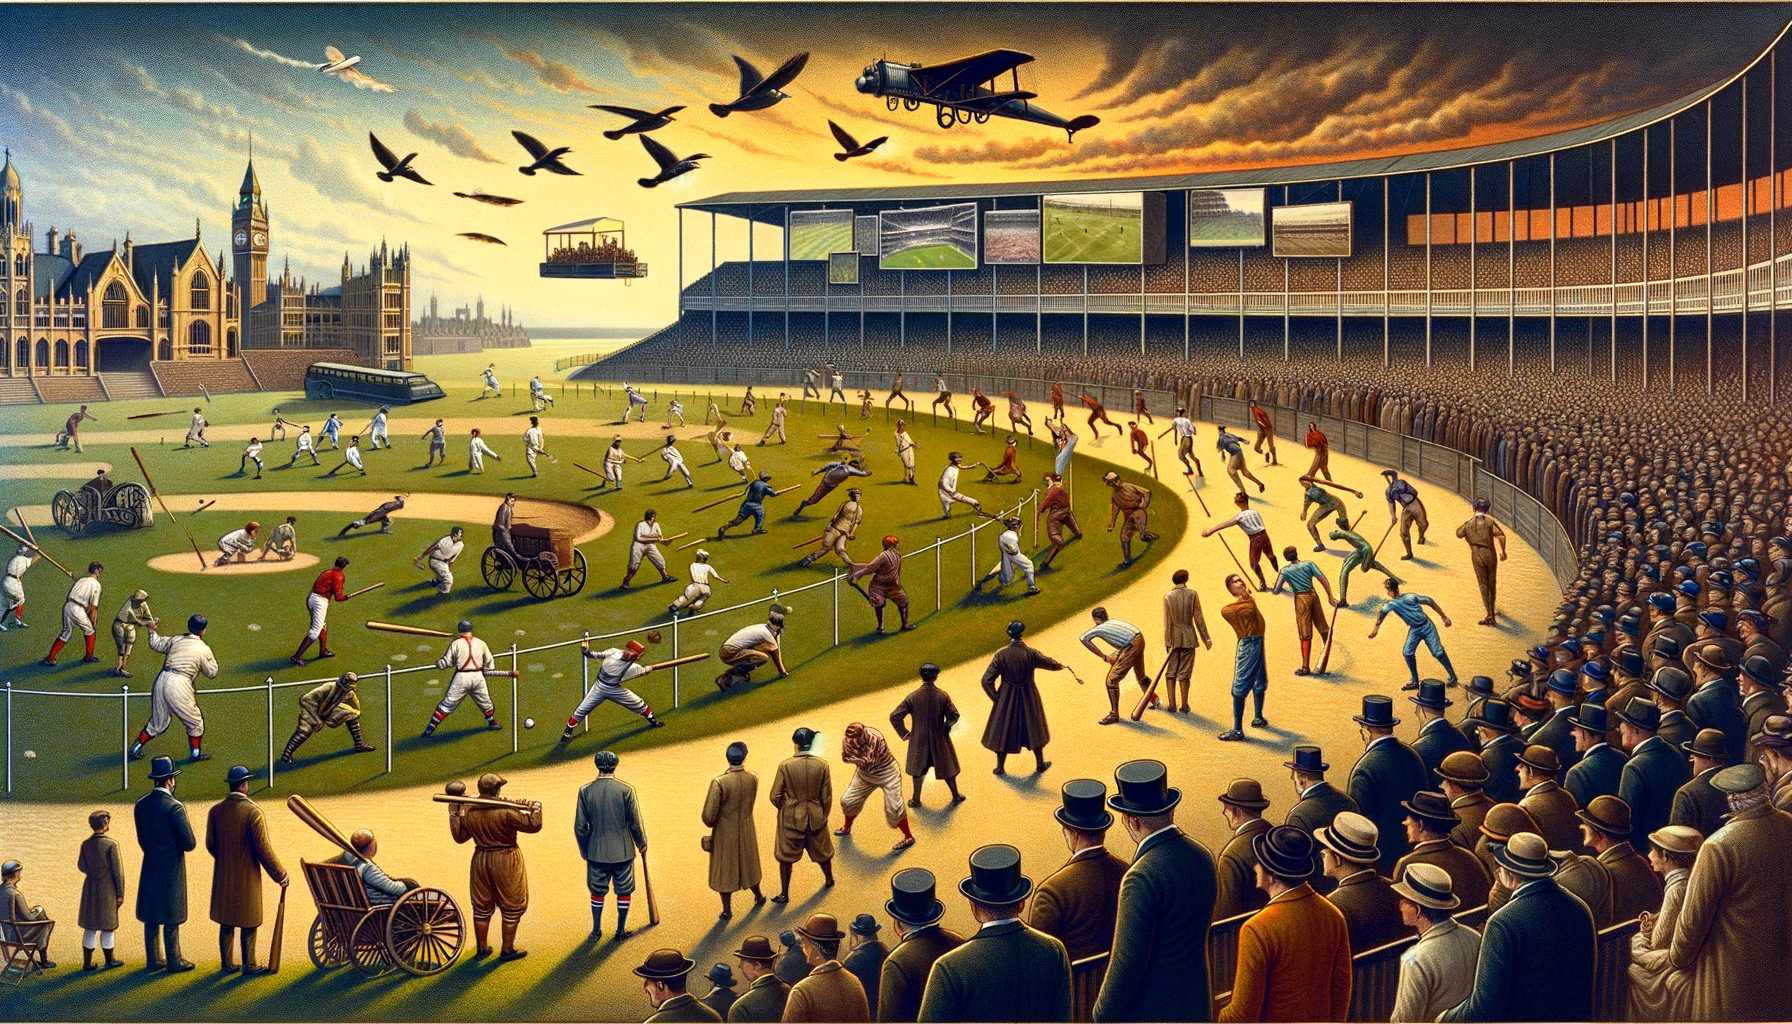 THE EVOLUTION OF SPORTS GAMES FROM THE 19TH CENTURY TO THIS PRESENT DAY